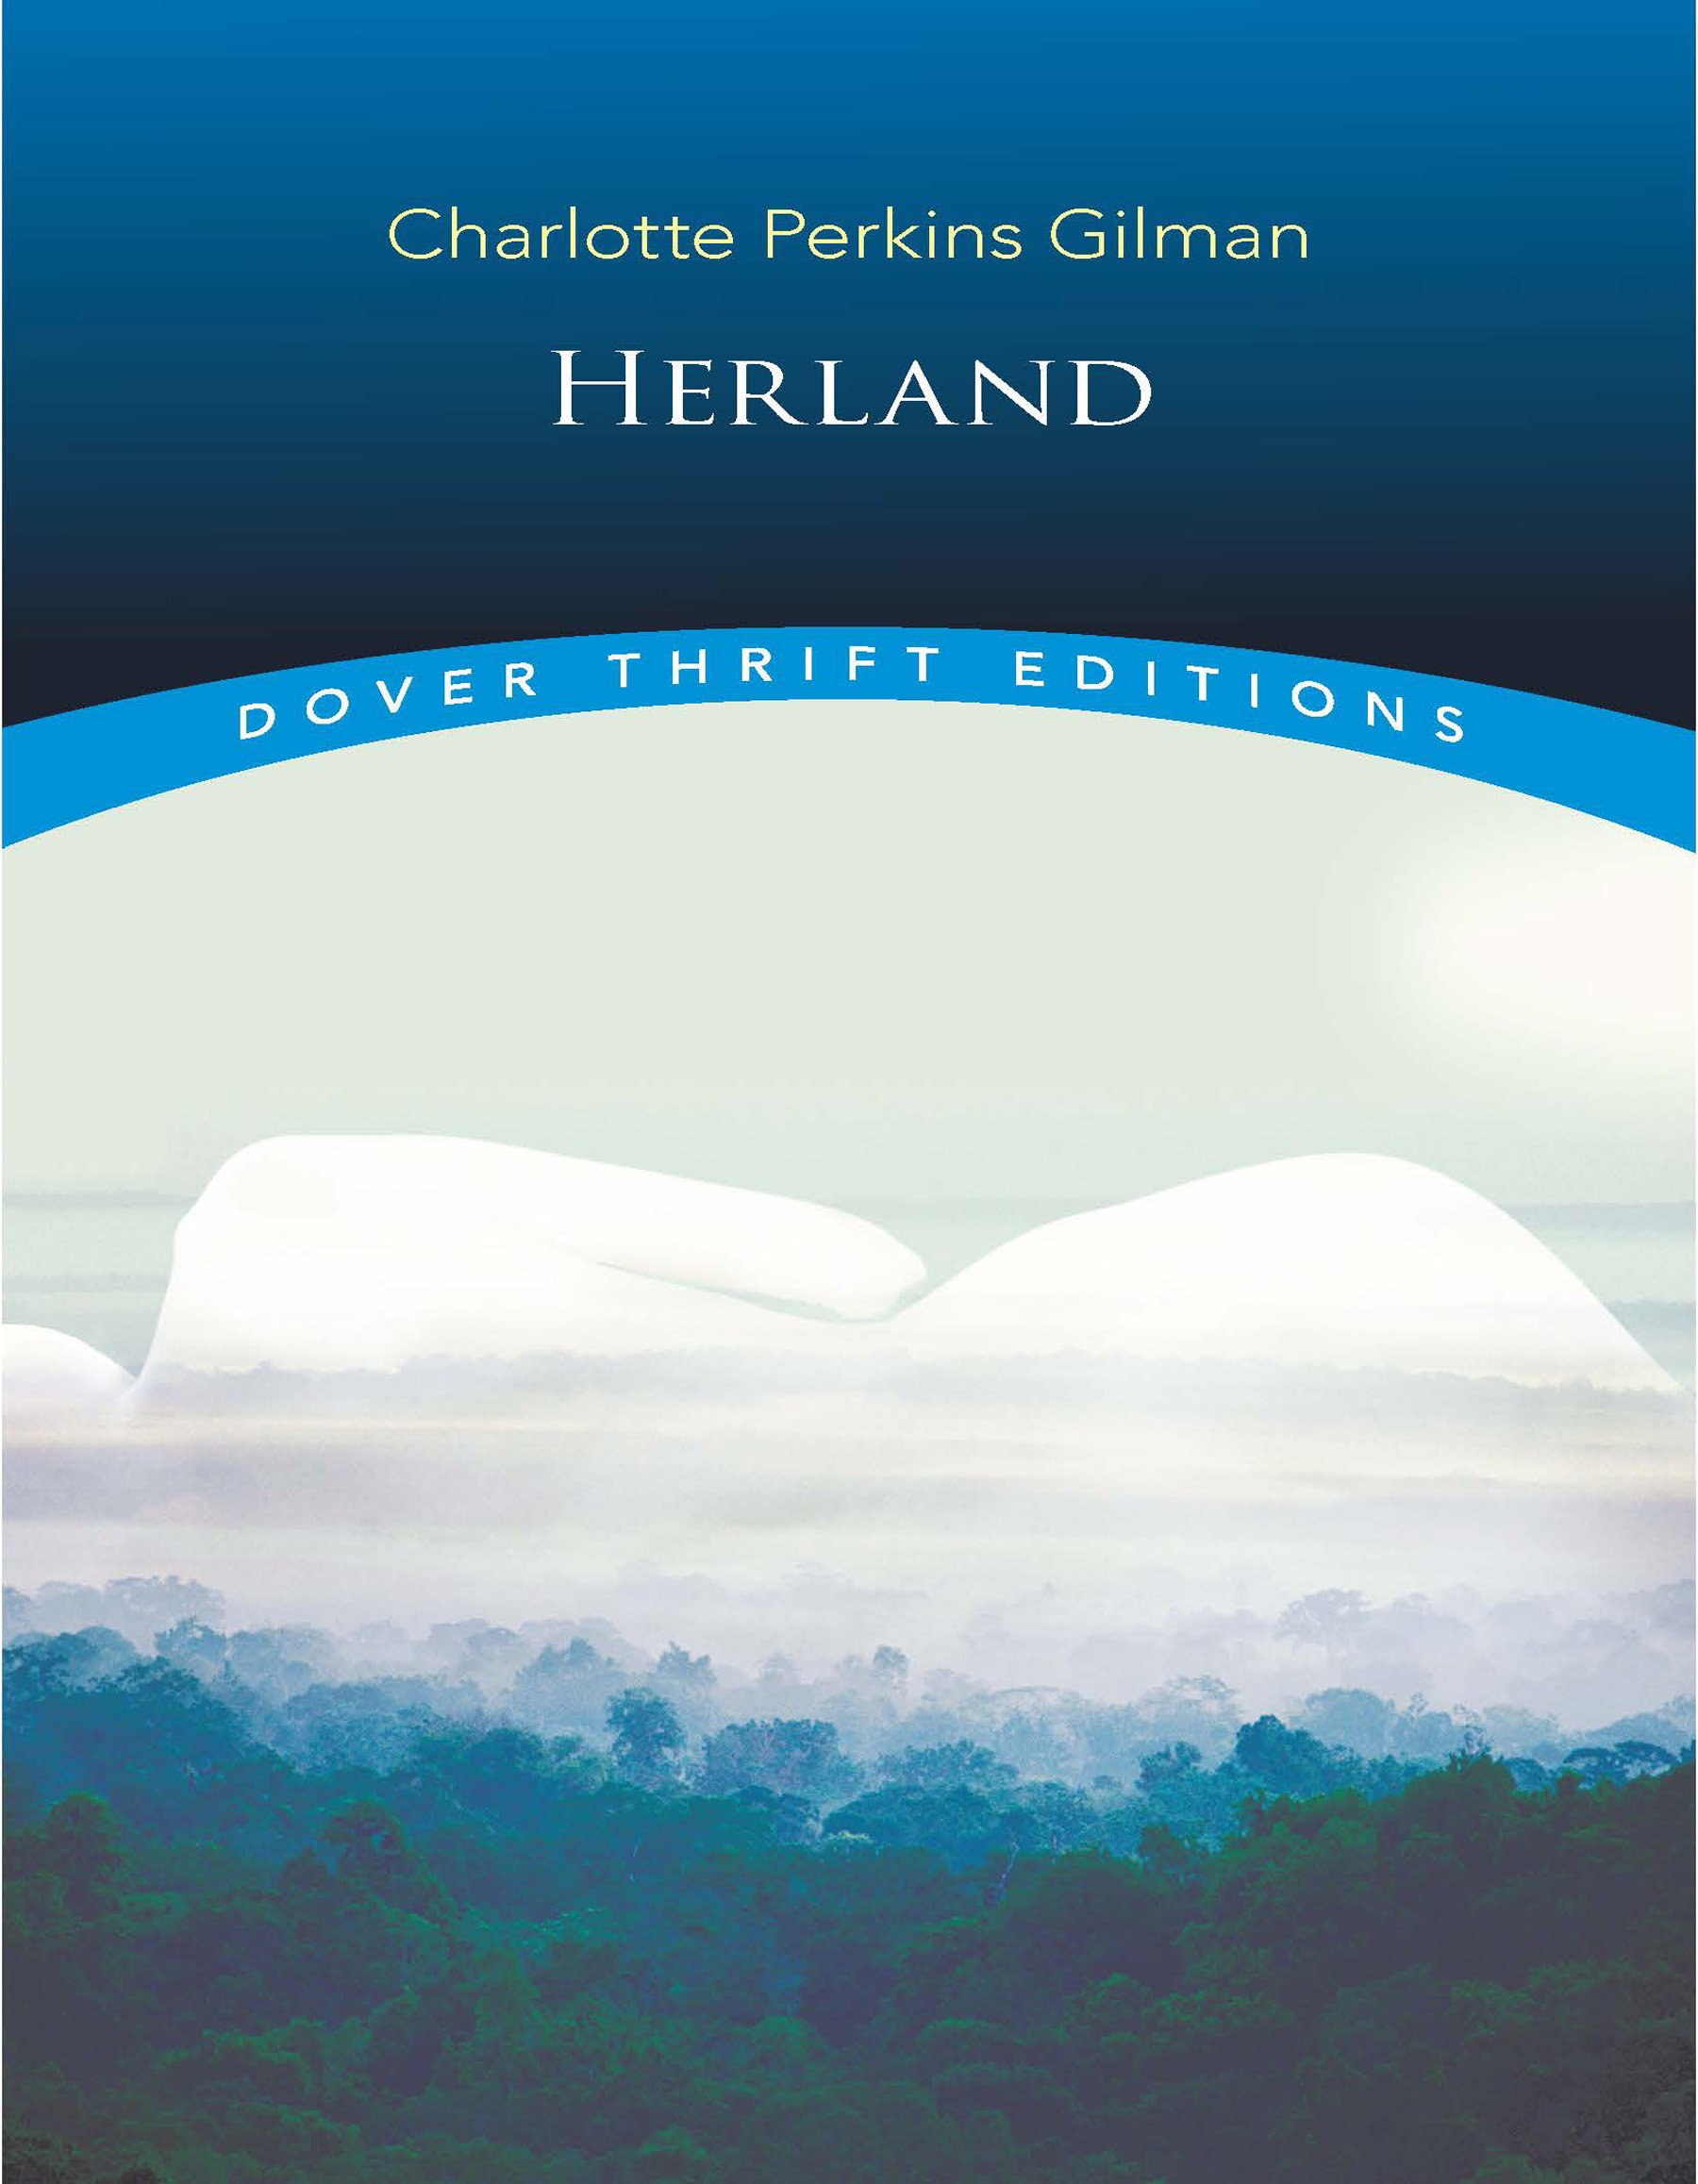 Dover Thrift Editions: HERLAND